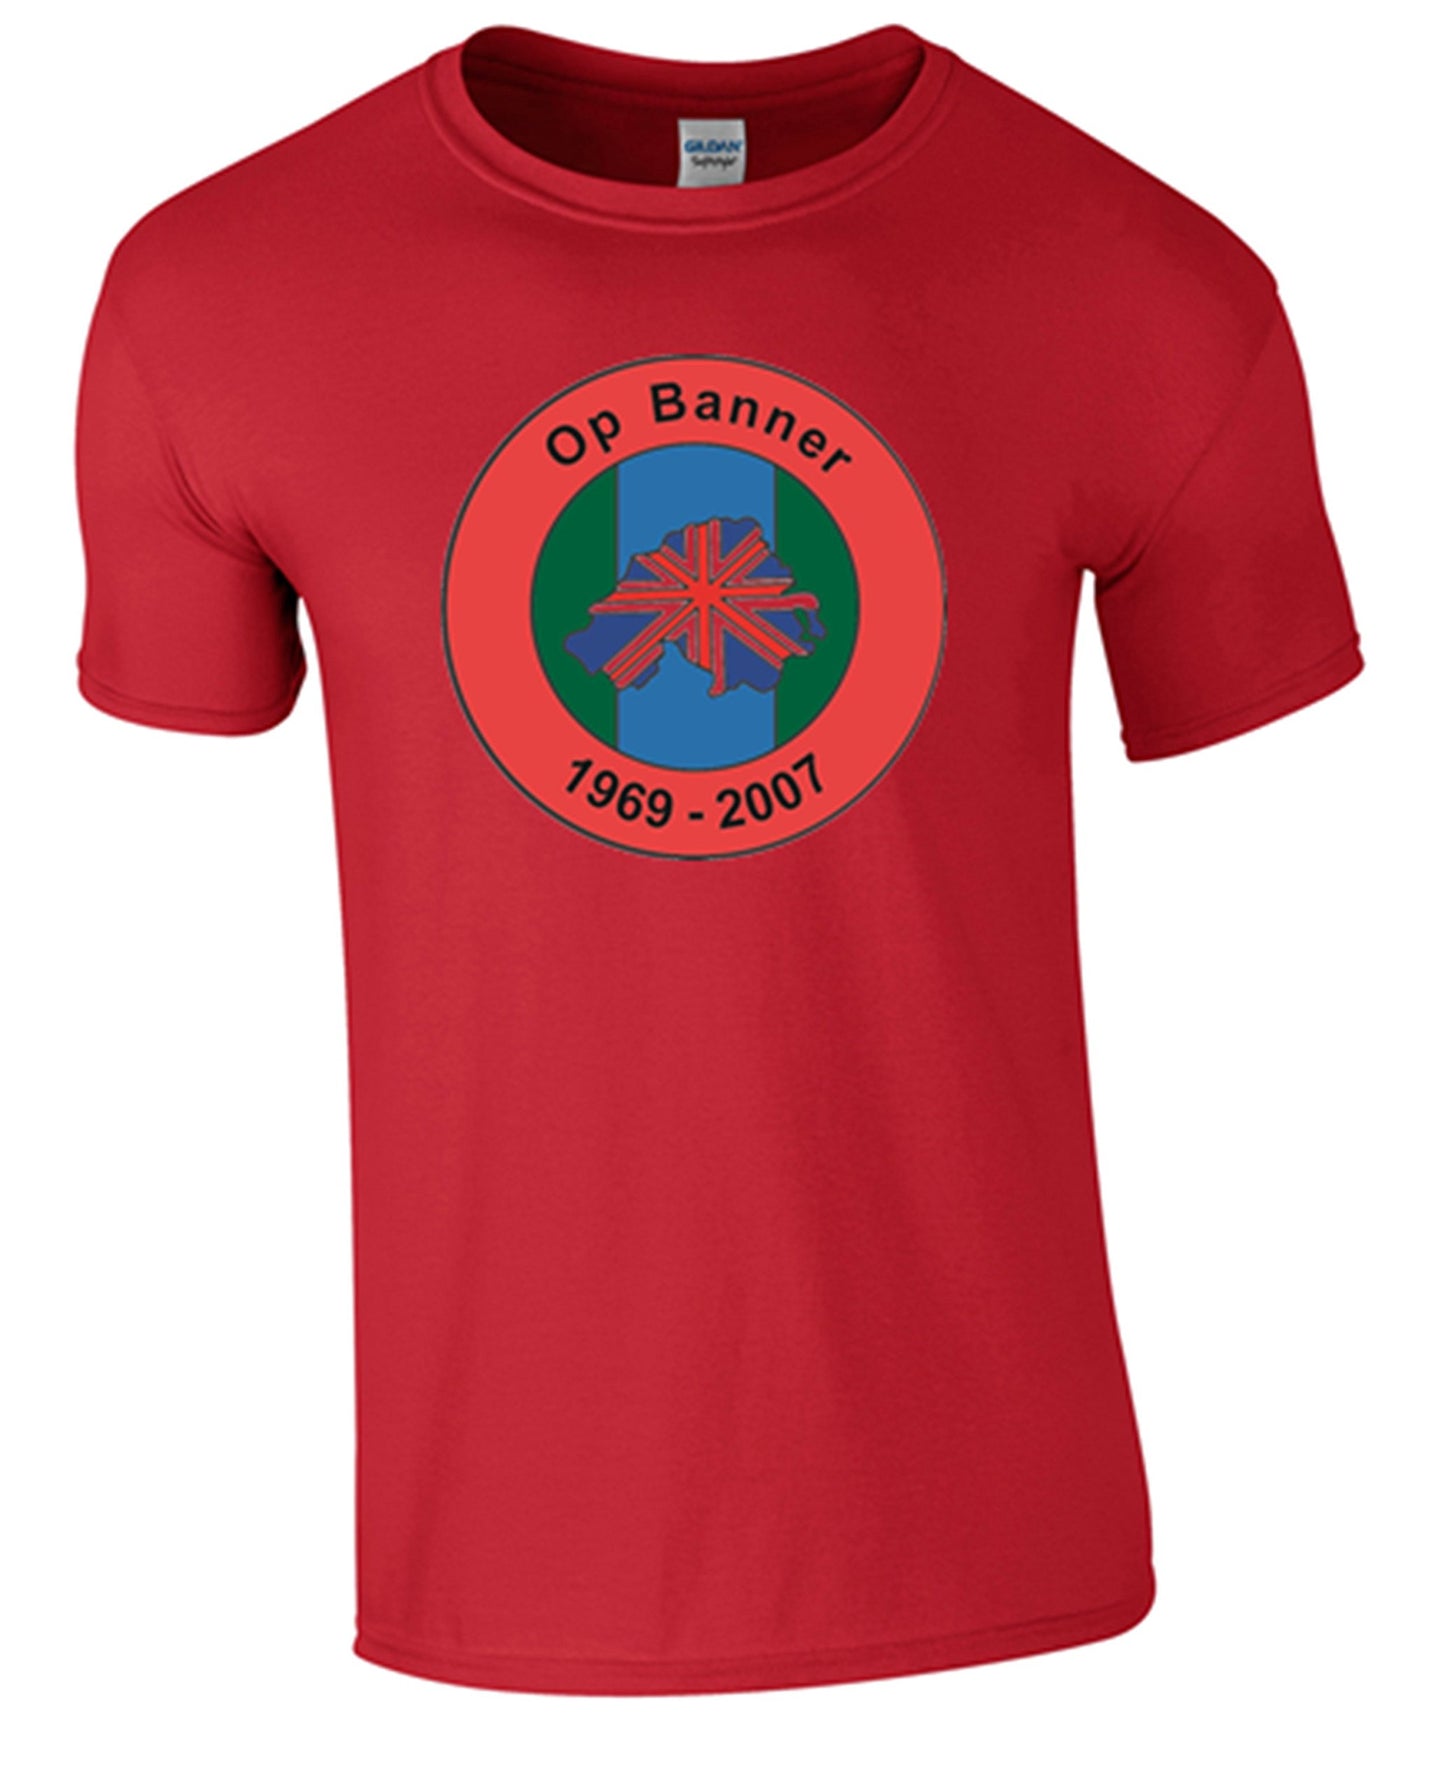 Northern Ireland Ops Banner T-Shirt (XL, Red) - Army 1157 kit Army 1157 Kit